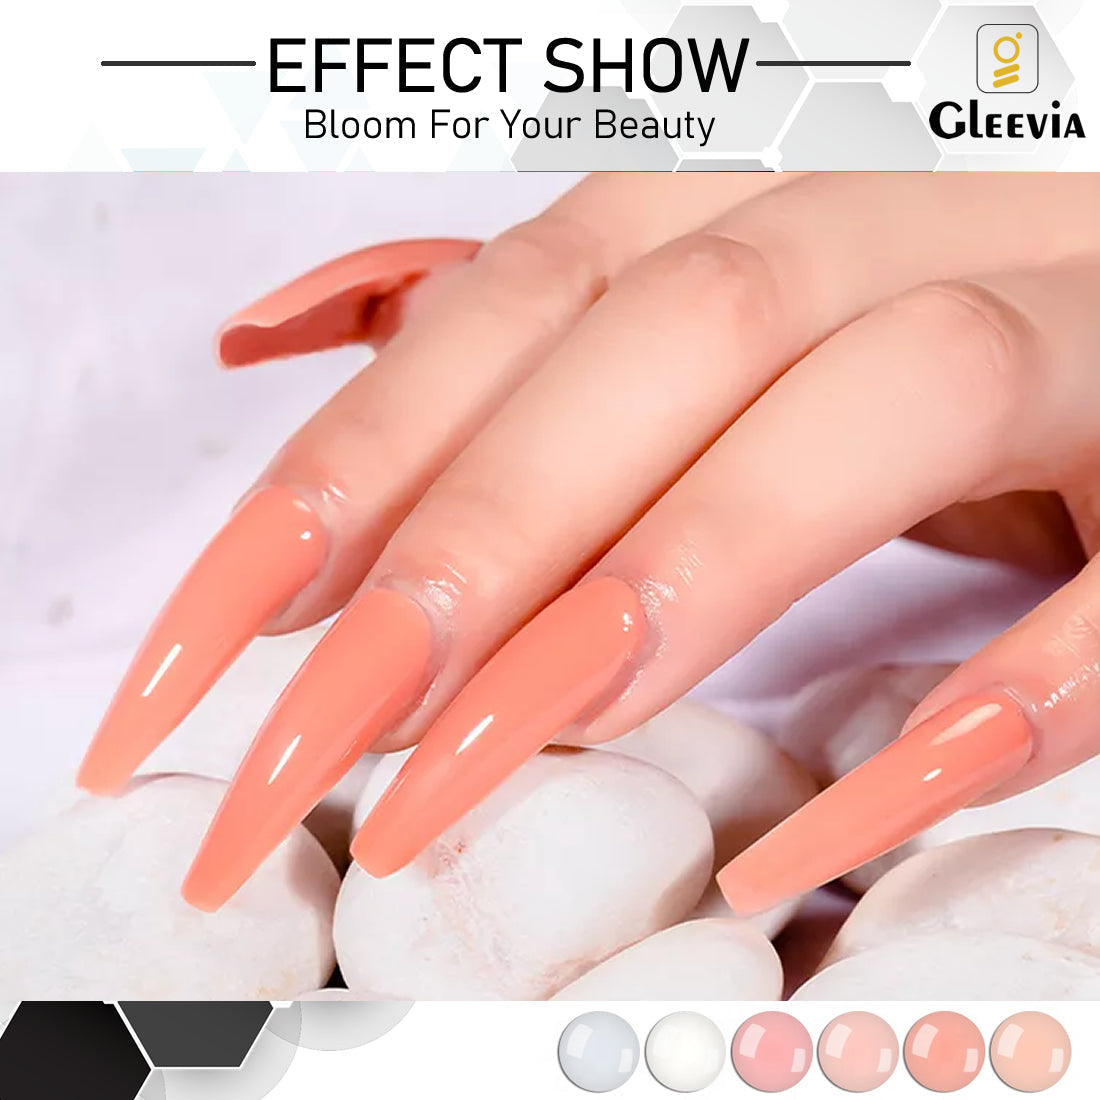 Gel Nail Extensions: What to Know Before You Book - StyleSeat